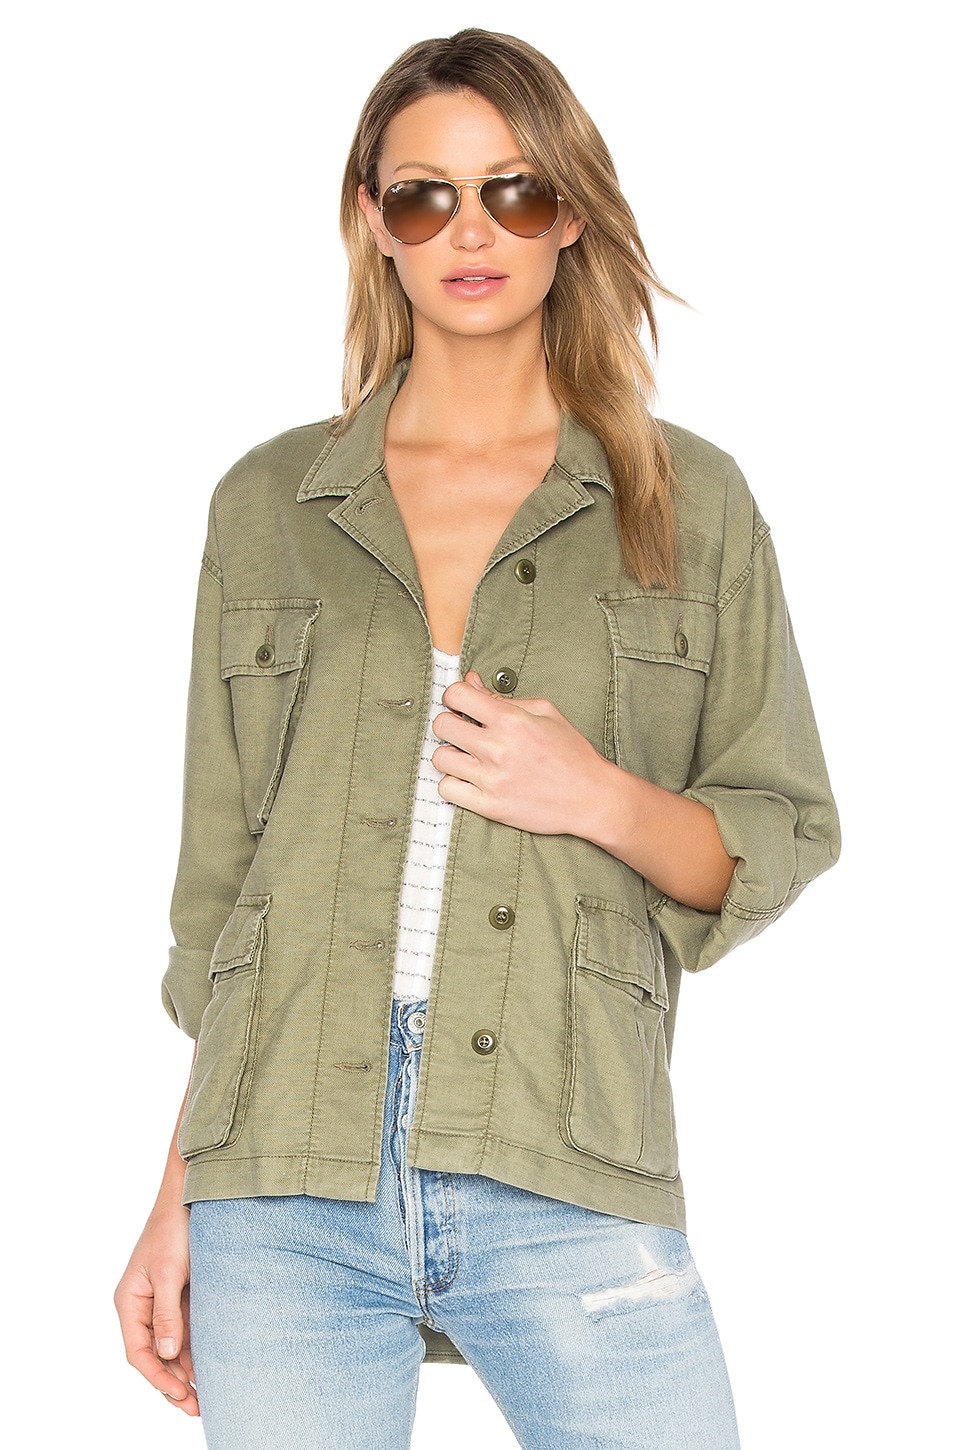 The Great The Commander Jacket in Faded Army | REVOLVE